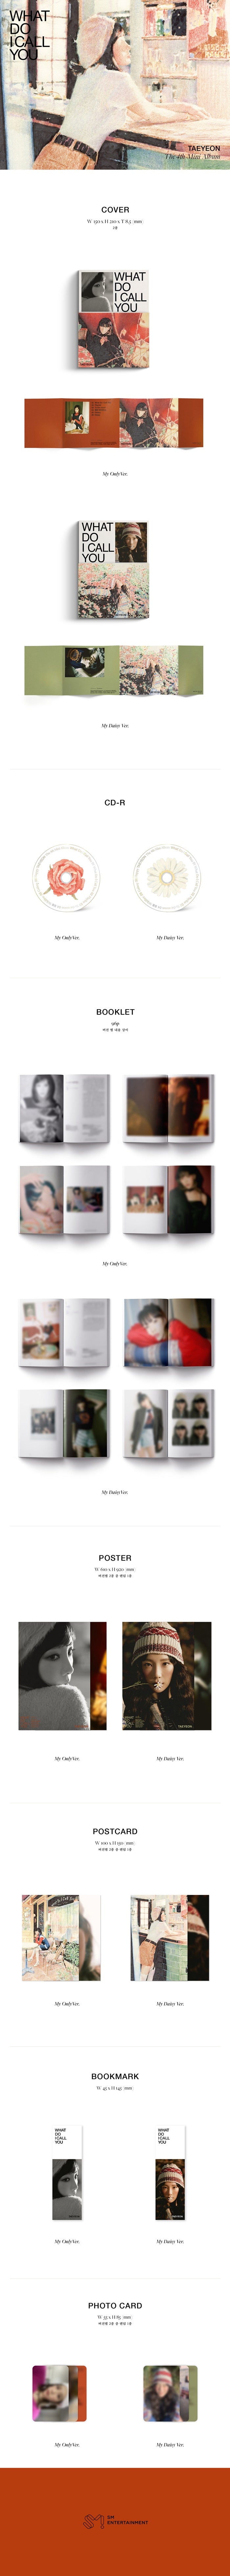 1 CD
1 Booklet (96 pages)
1 Bookmark
1 Postcard